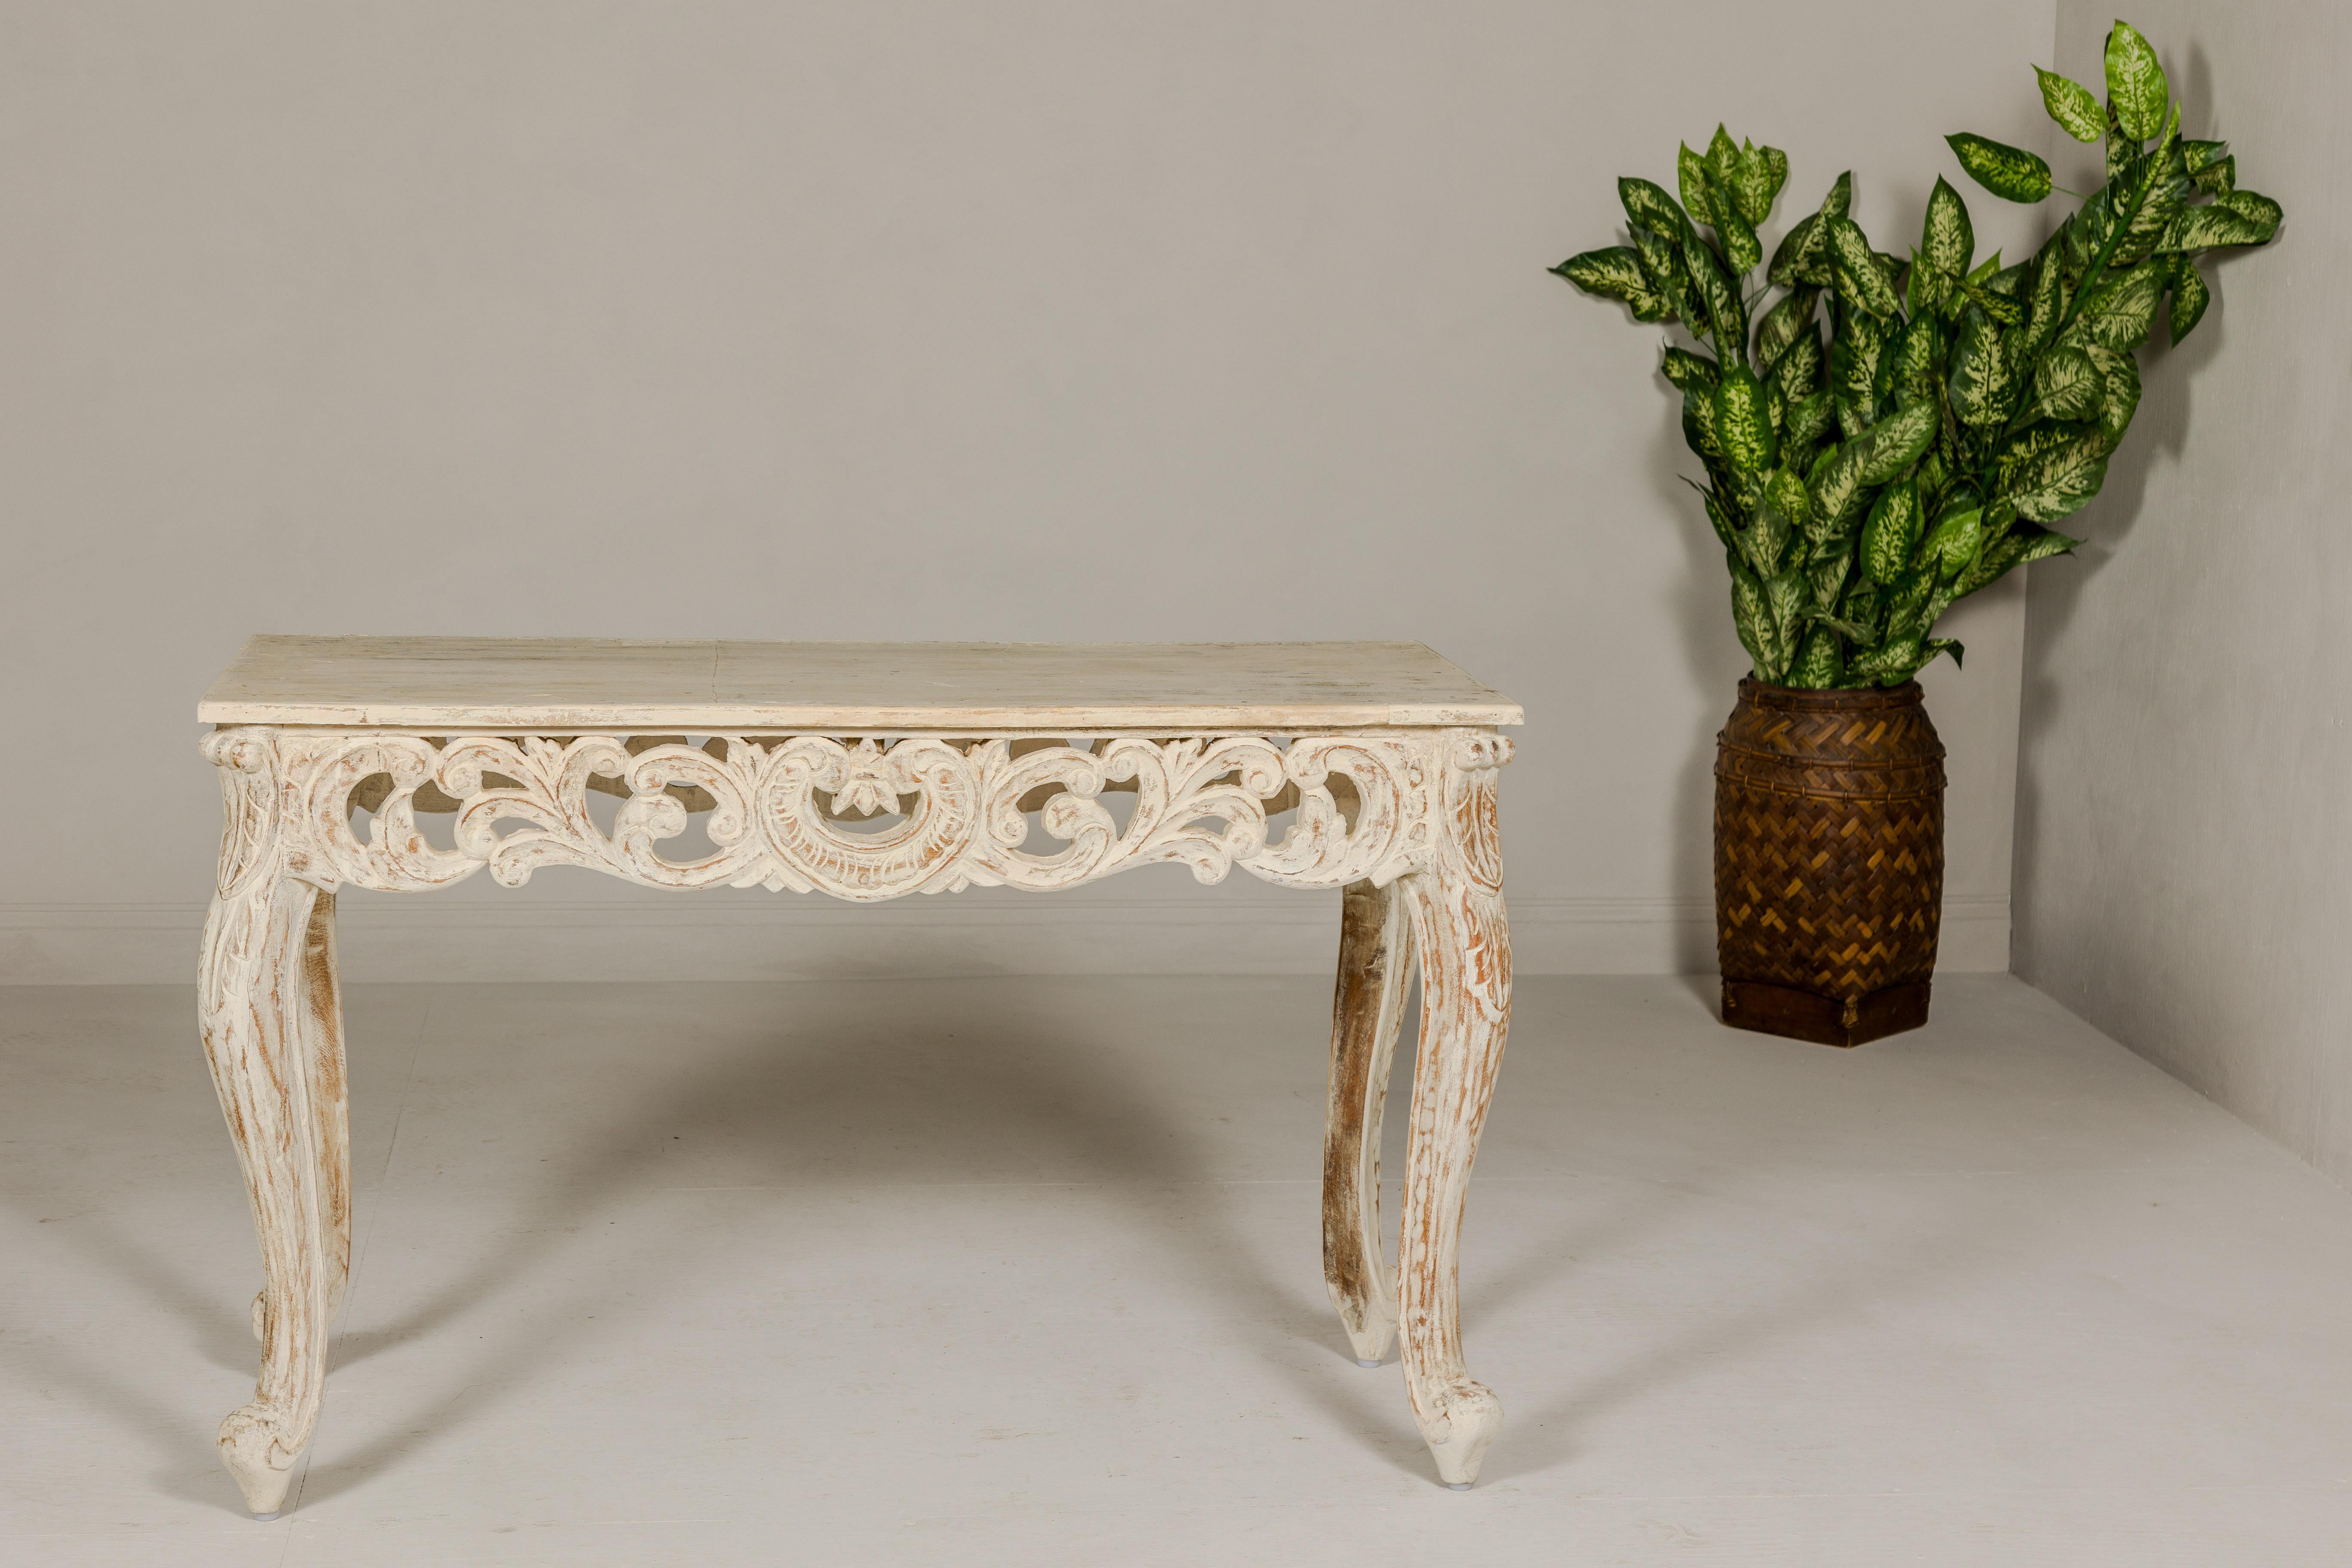 Wood Rococo Style Painted Console Table with Carved Apron and Distressed Finish For Sale